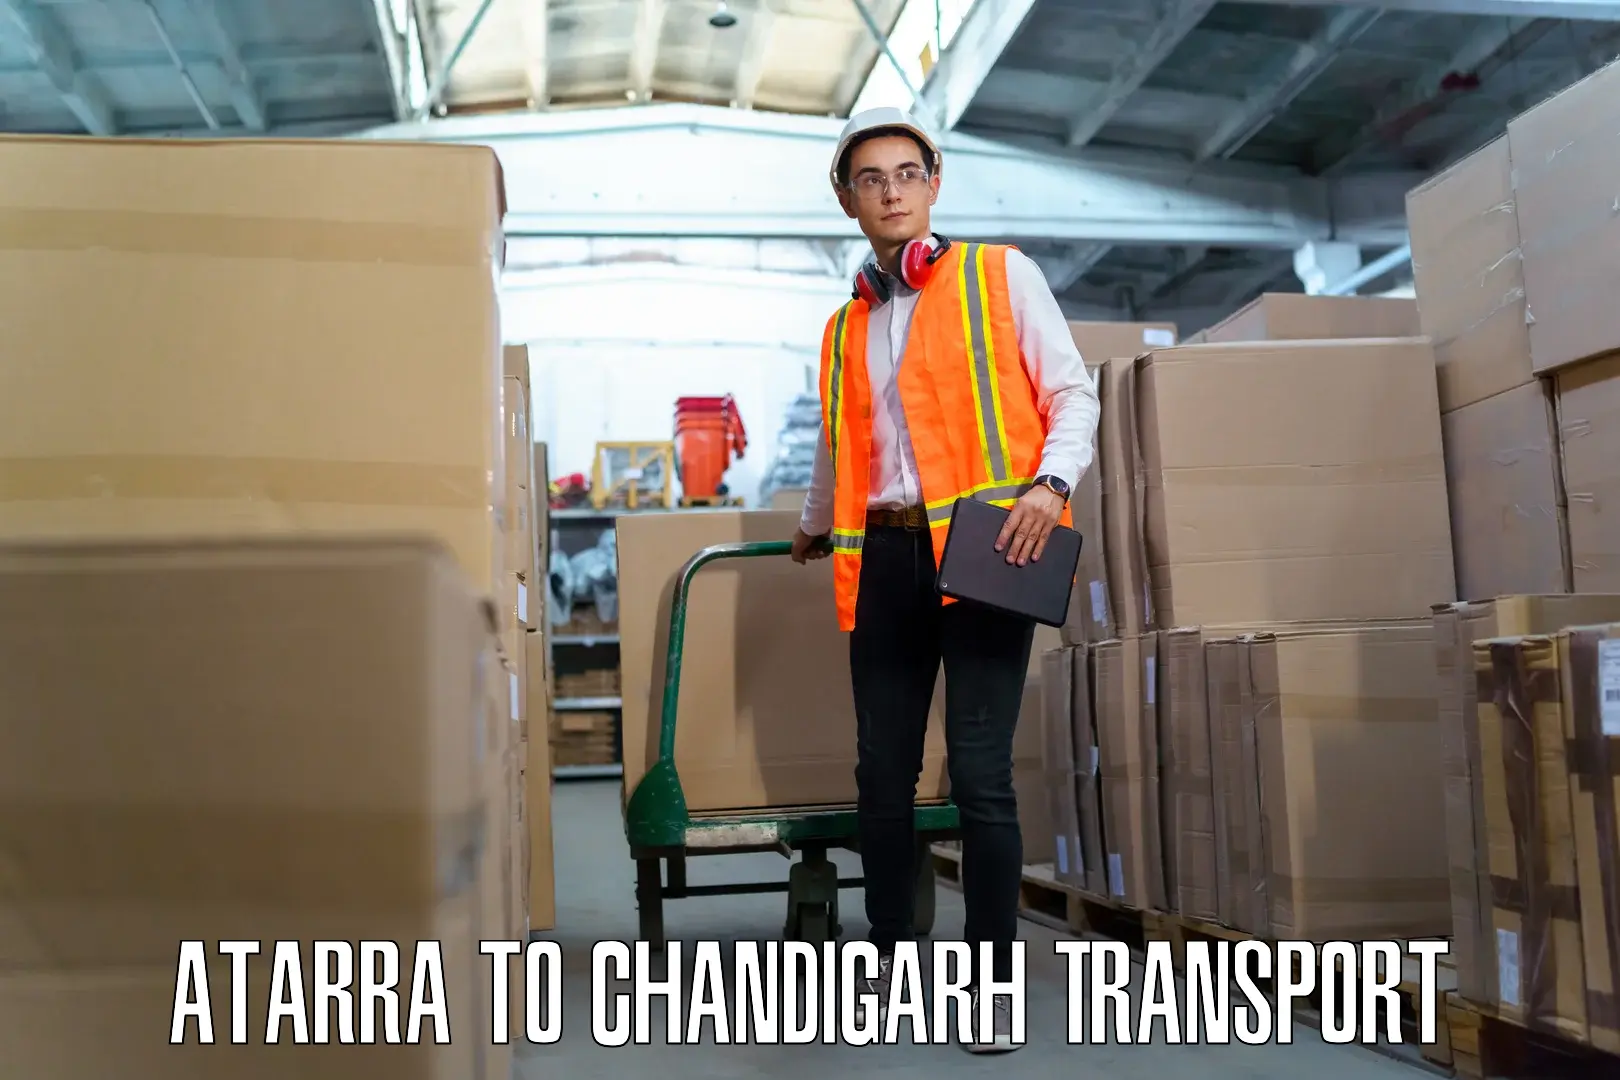 Daily transport service Atarra to Chandigarh